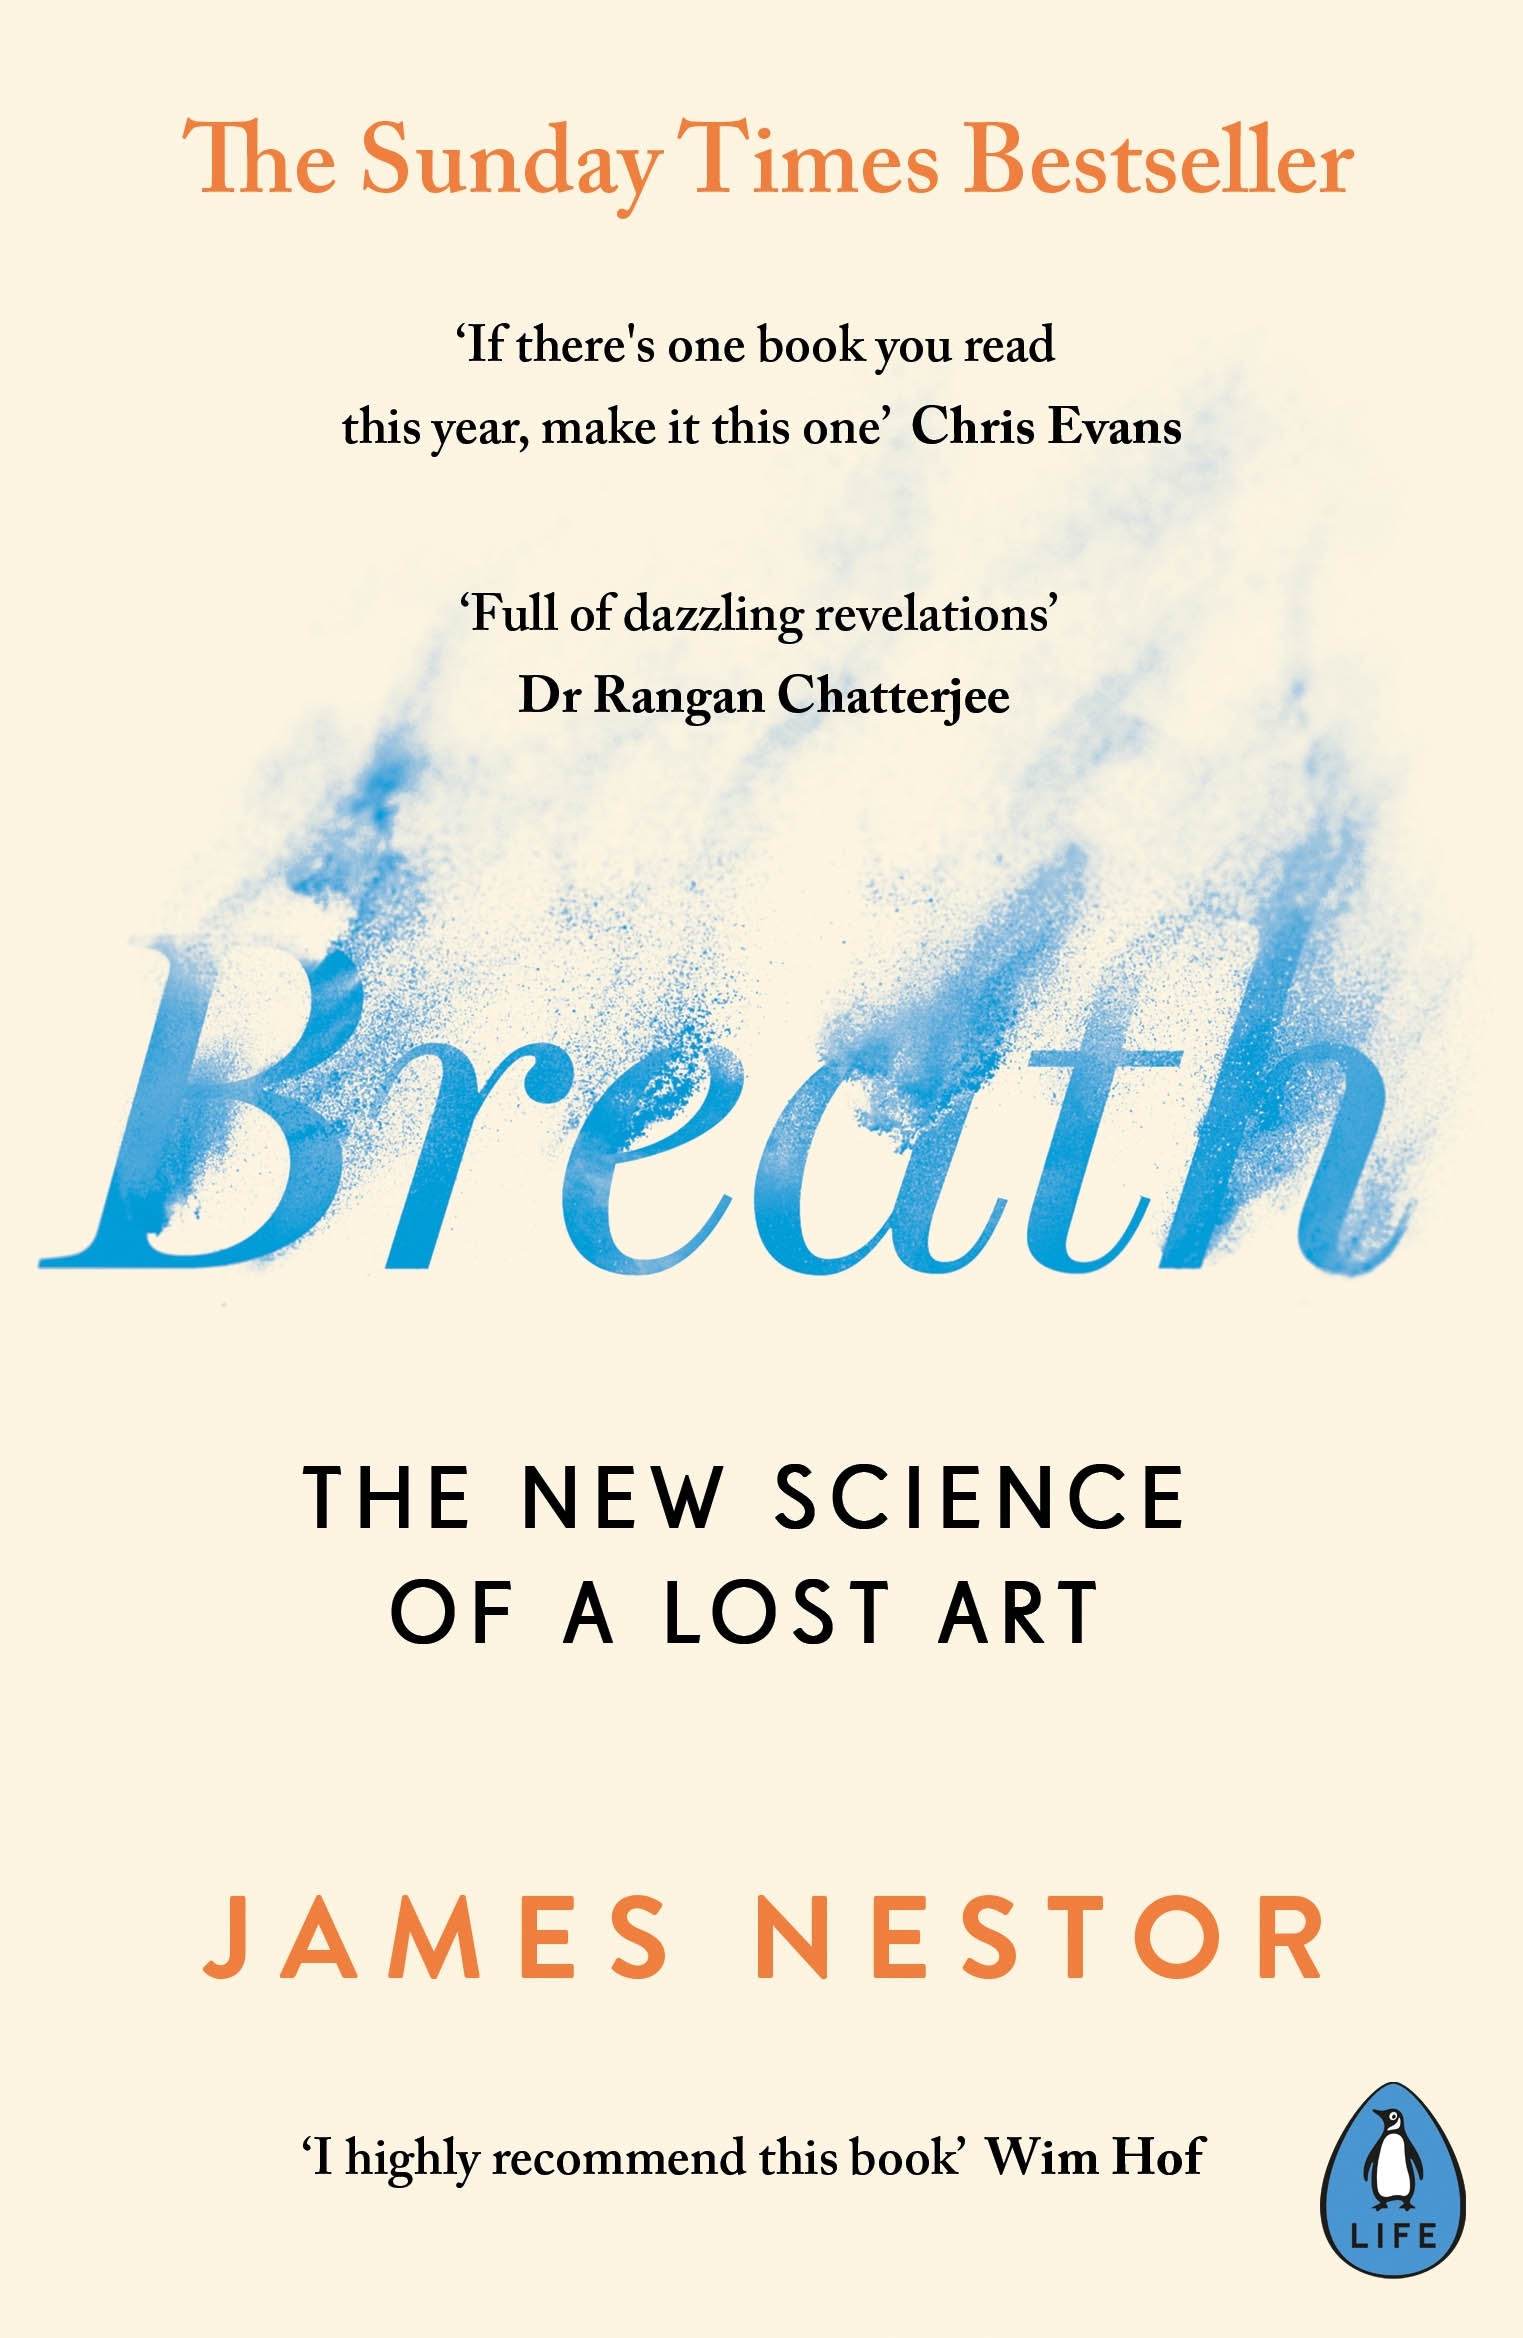 Breathe With James